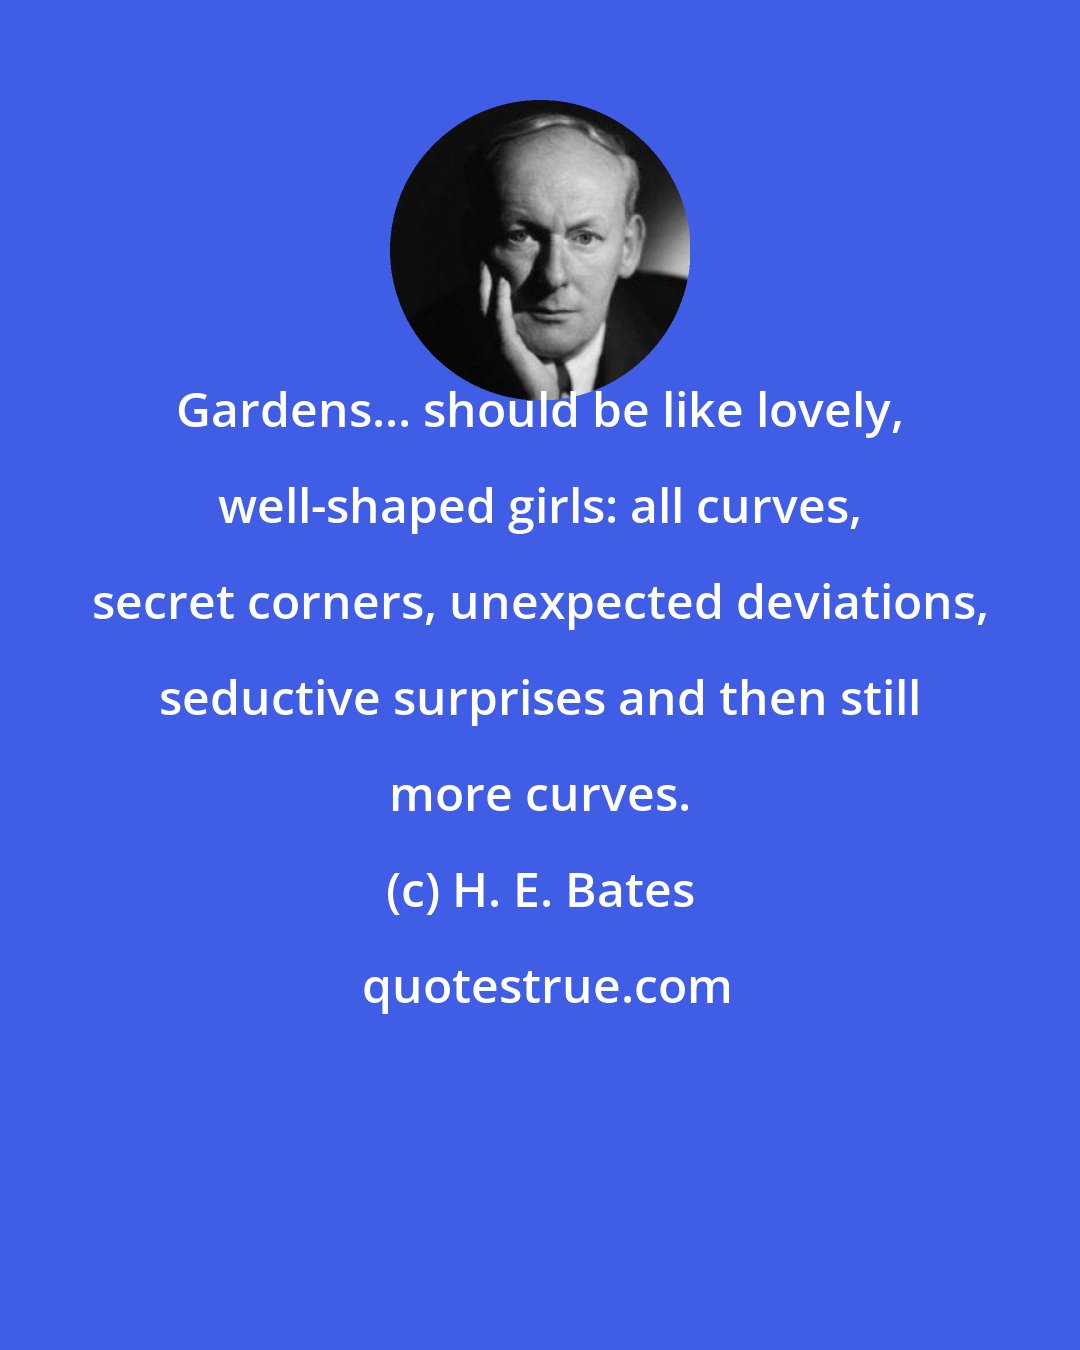 H. E. Bates: Gardens... should be like lovely, well-shaped girls: all curves, secret corners, unexpected deviations, seductive surprises and then still more curves.